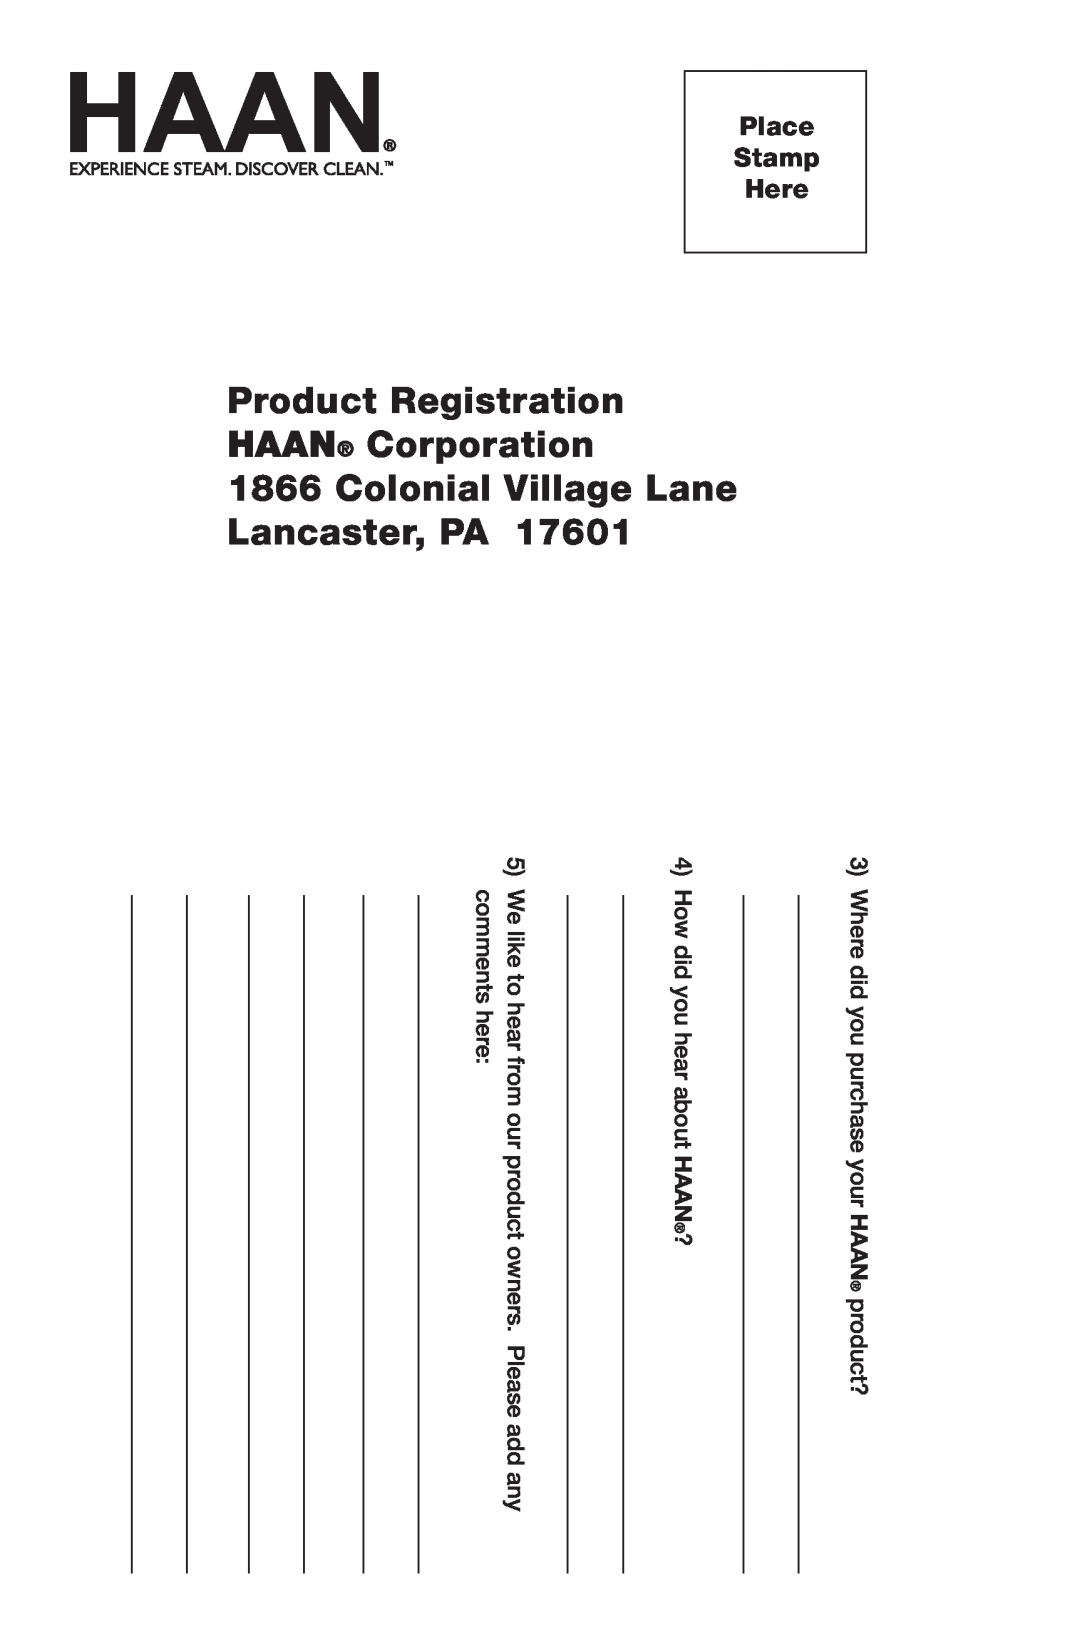 Haan HD-60 instruction manual Product Registration HAAN Corporation, Colonial Village Lane Lancaster, PA, Place Stamp Here 